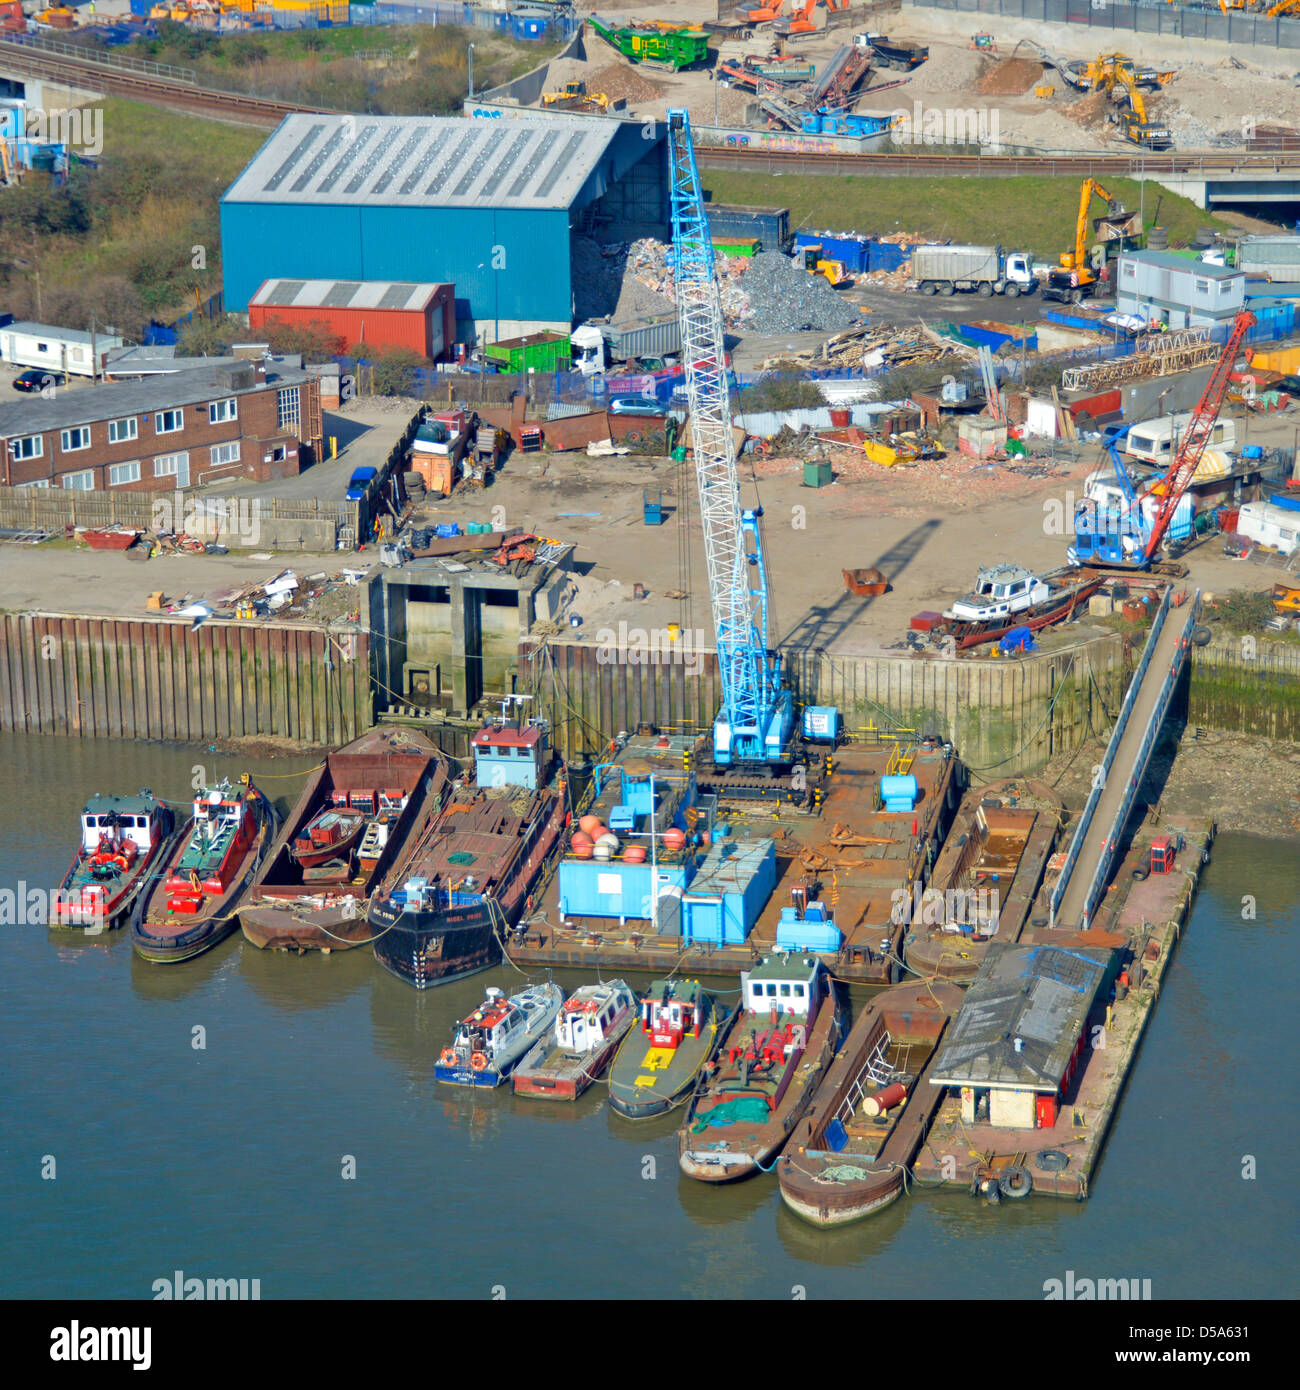 Aerial view of boat and barge repair yard beside the River Thames Stock Photo